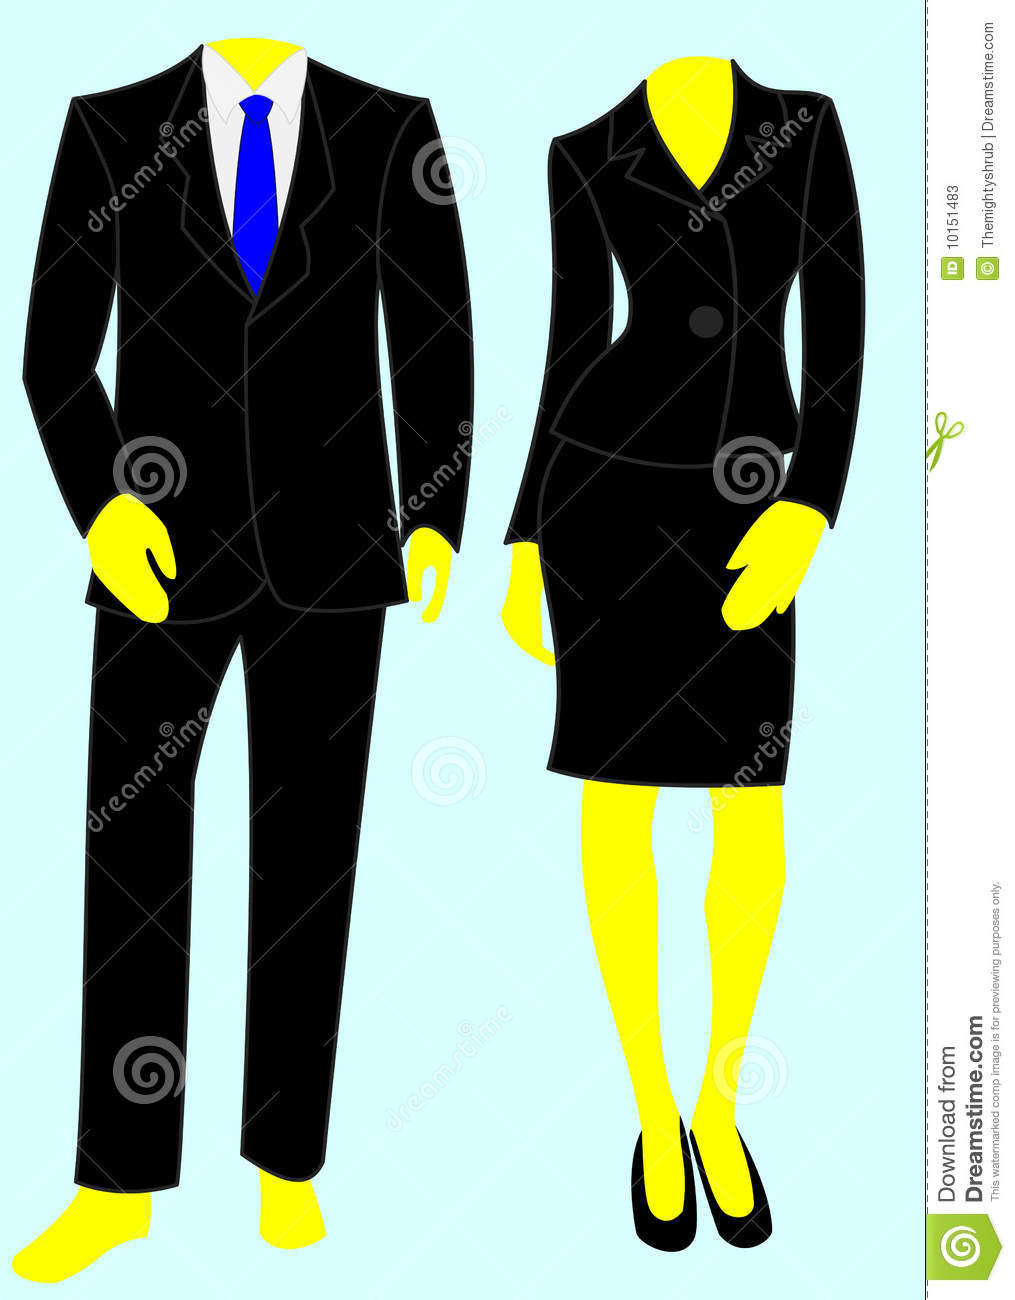 Man In Suit And Tie Clipart Two Smart Business Suits